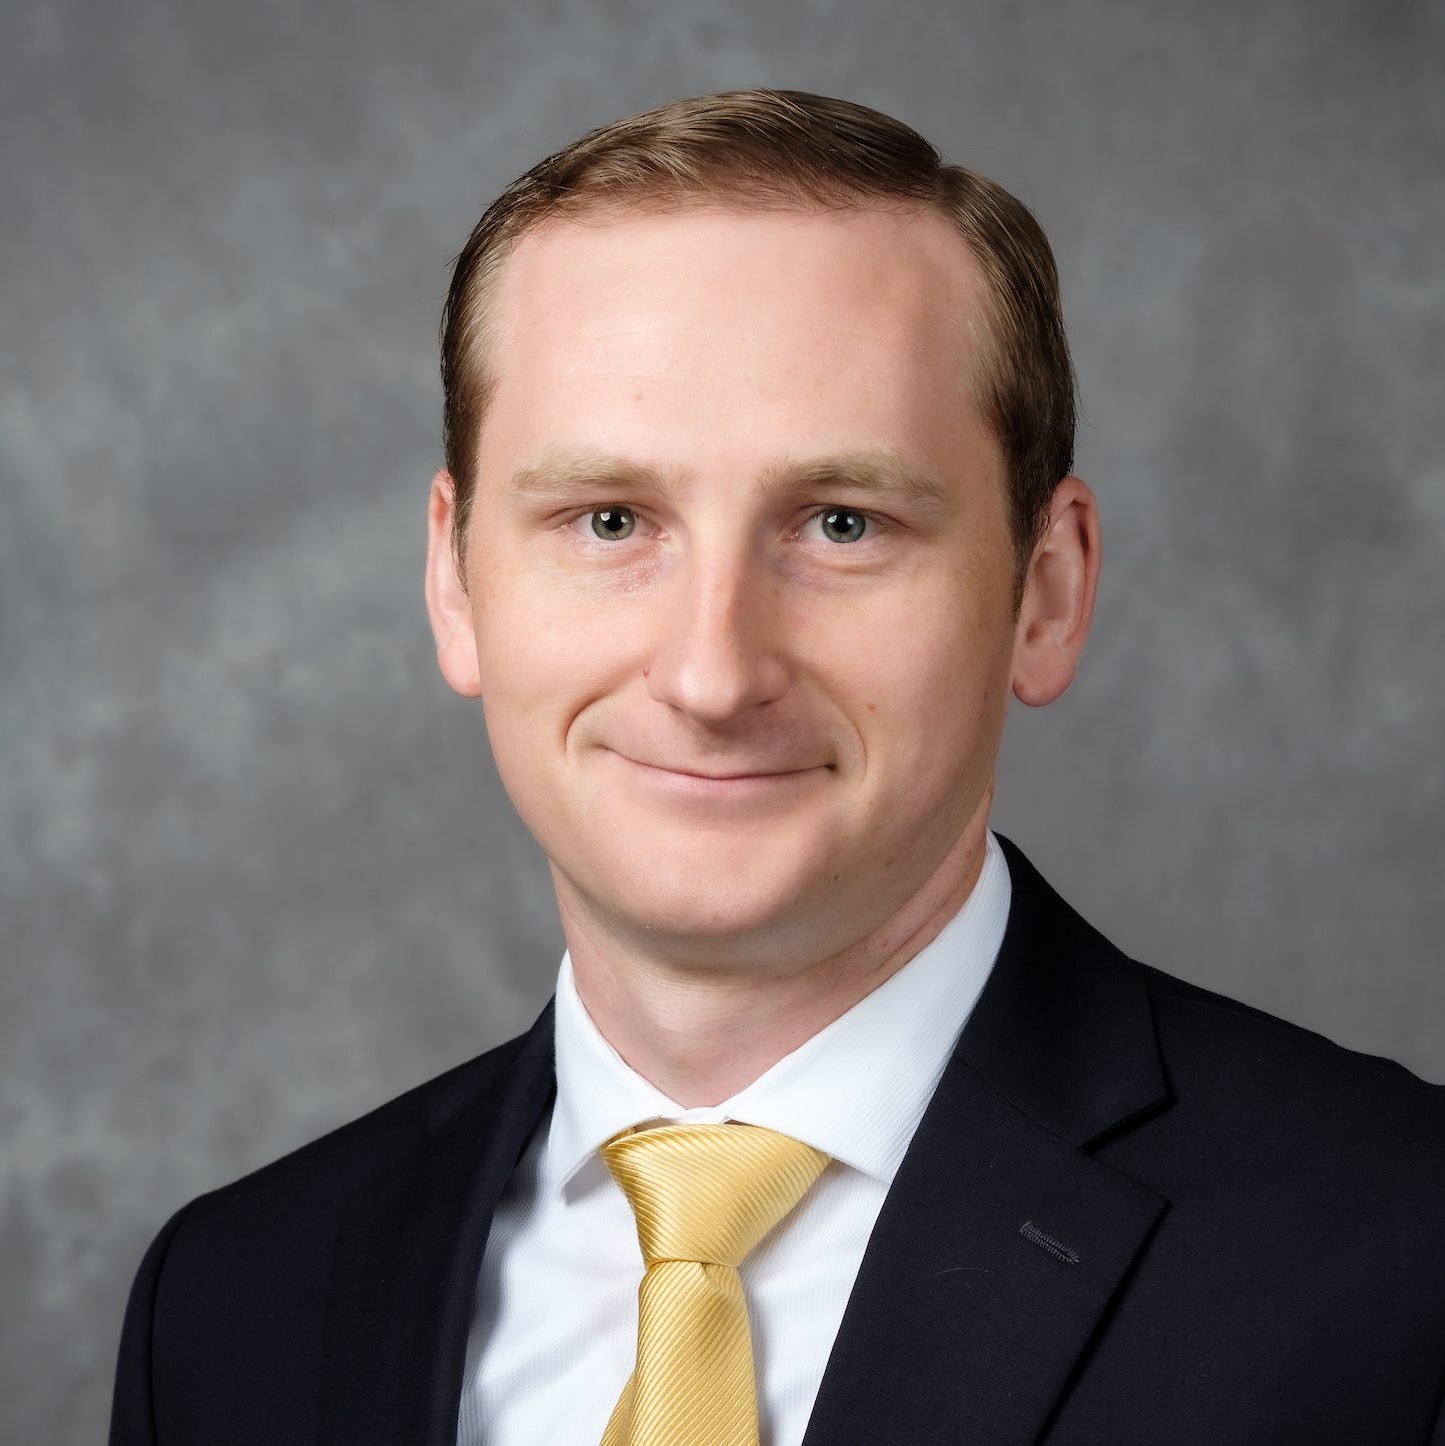 Wake Forest new faculty headshots, Wednesday, August 14, 2019. Stephan Shipe.